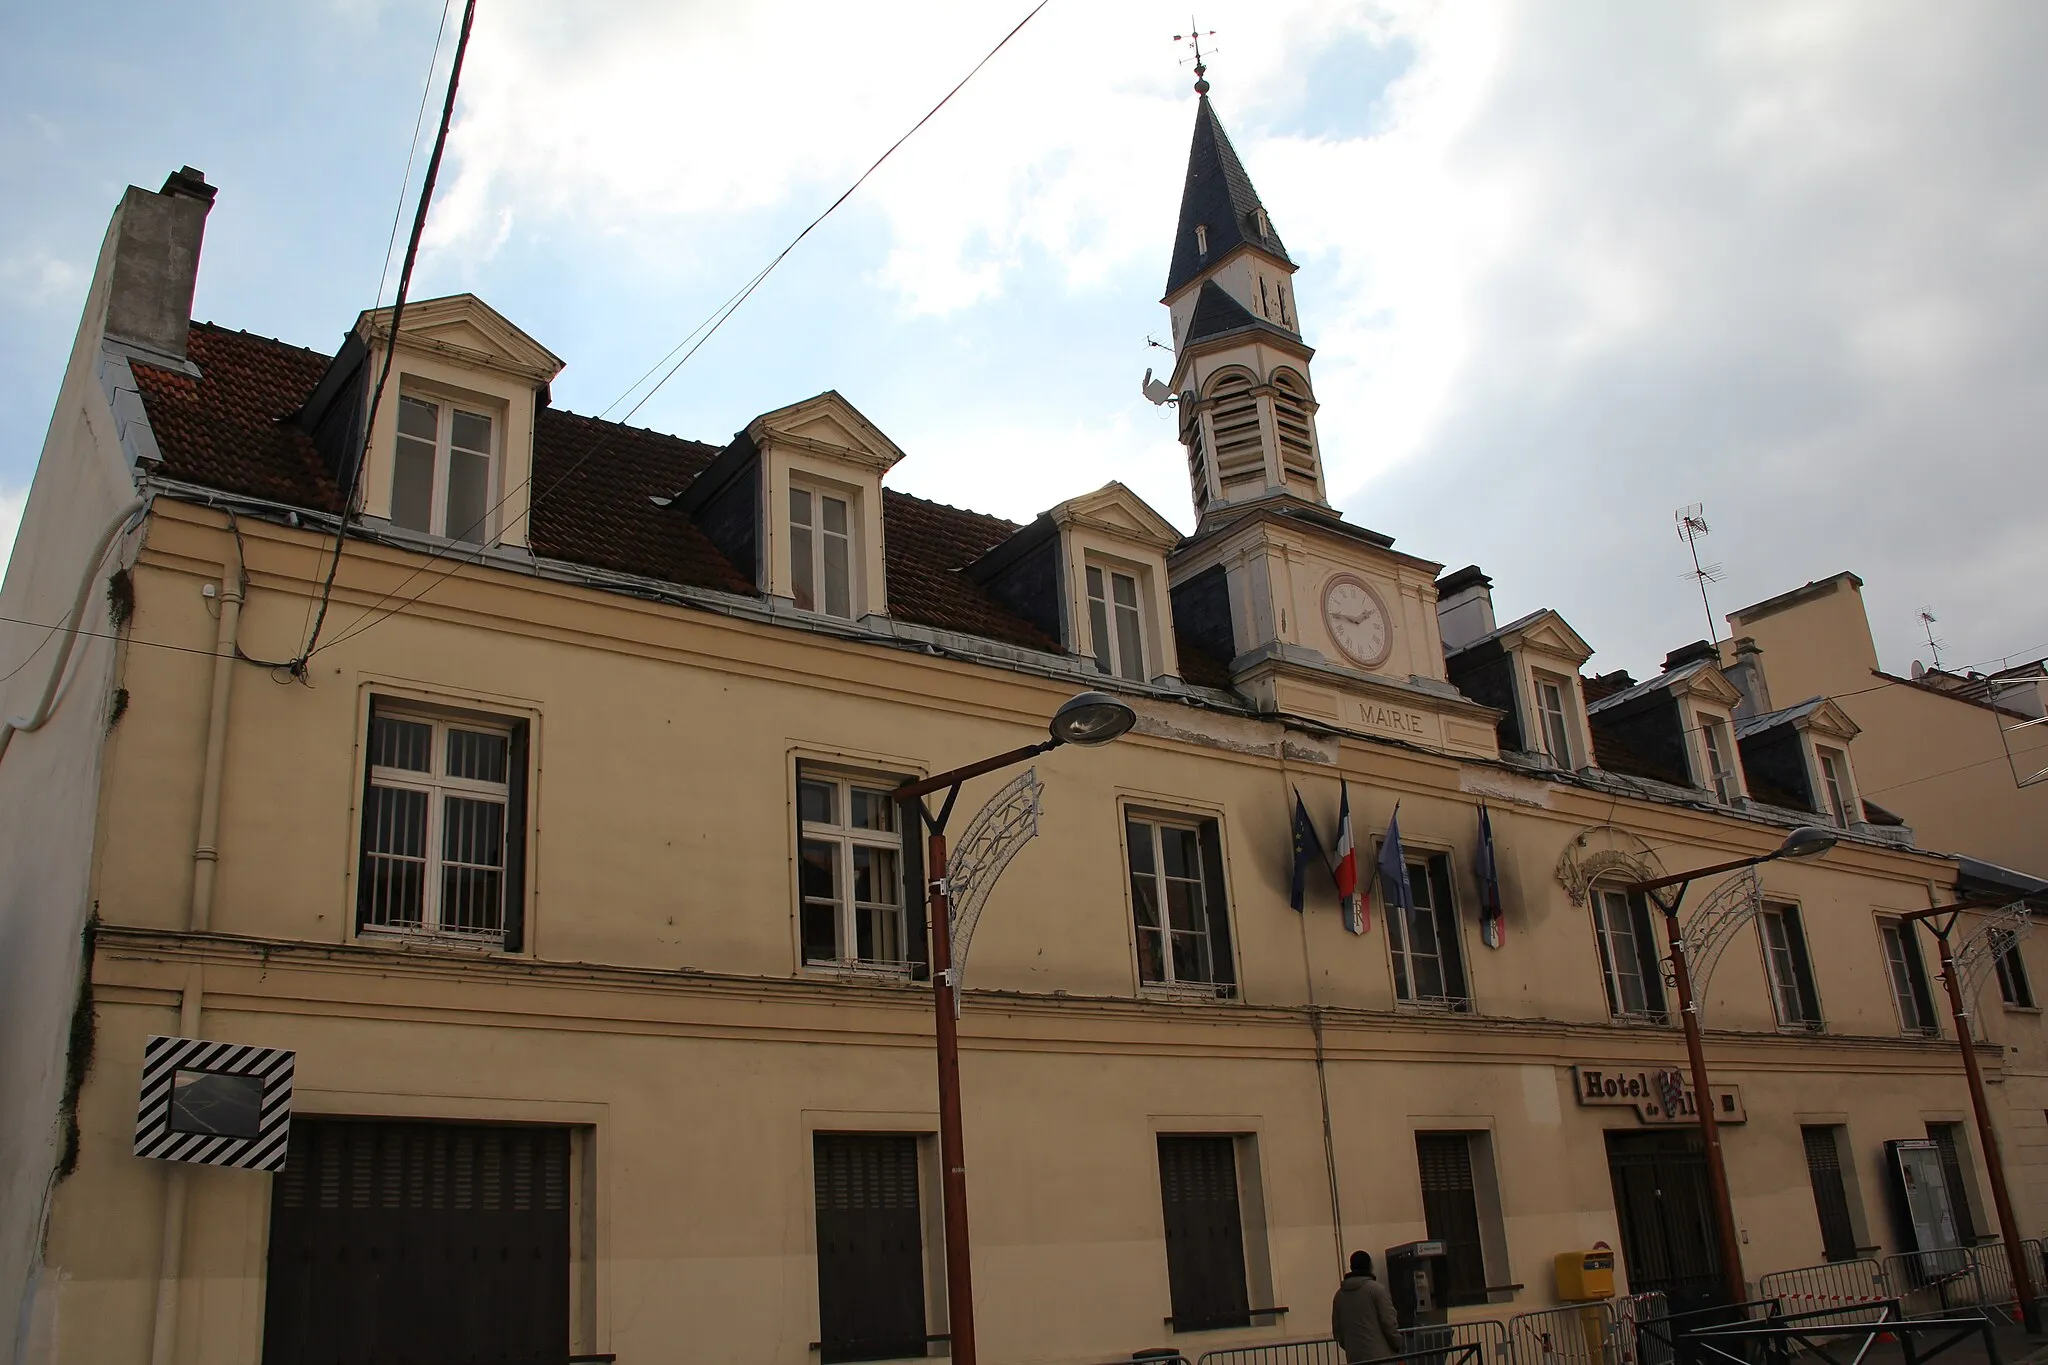 Photo showing: The town hall of Villeparisis, Seine-et-Marne, France.